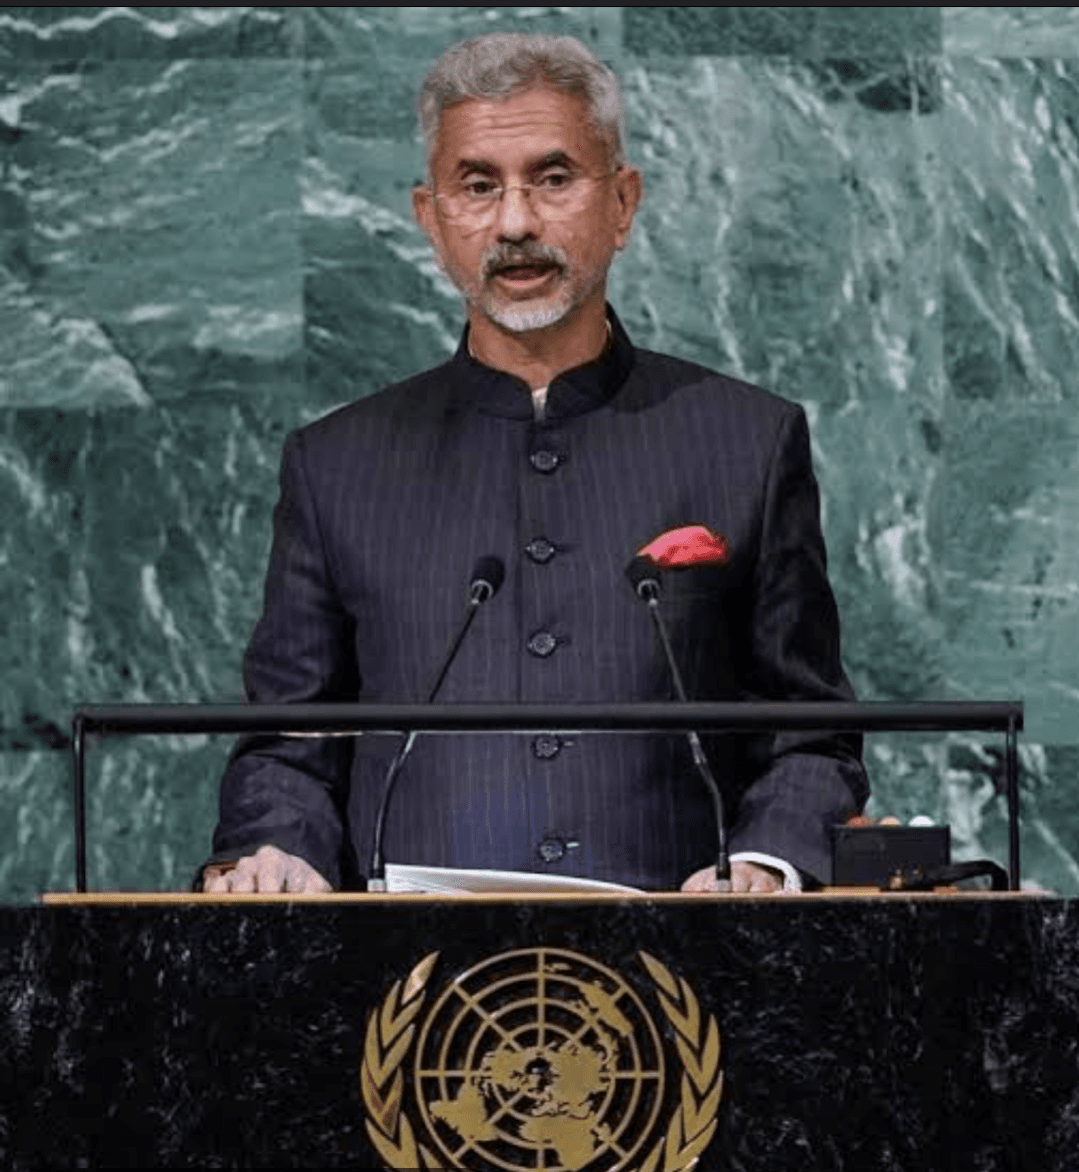 Analysing EAM's speech at the UN General Assembly